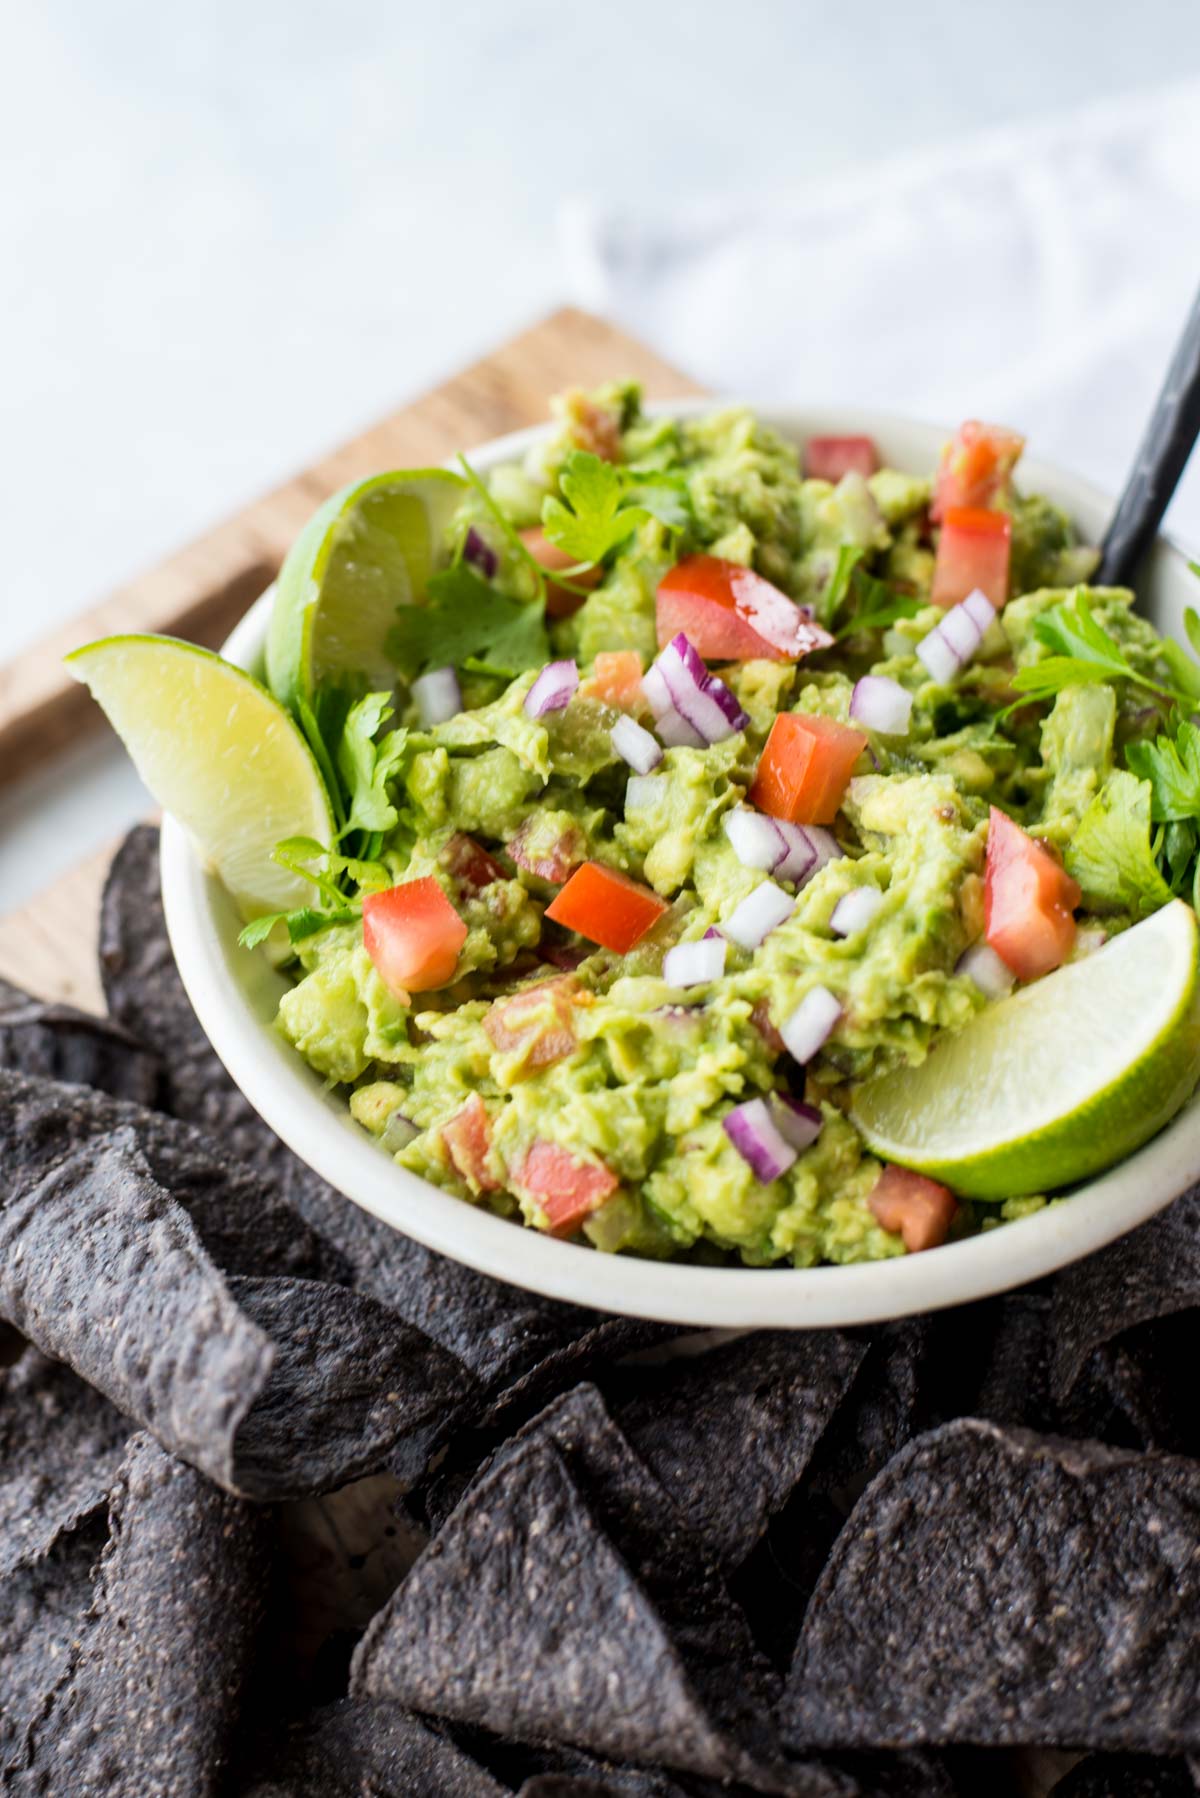 This 5 minute guacamole recipe is your answer to any meal. 